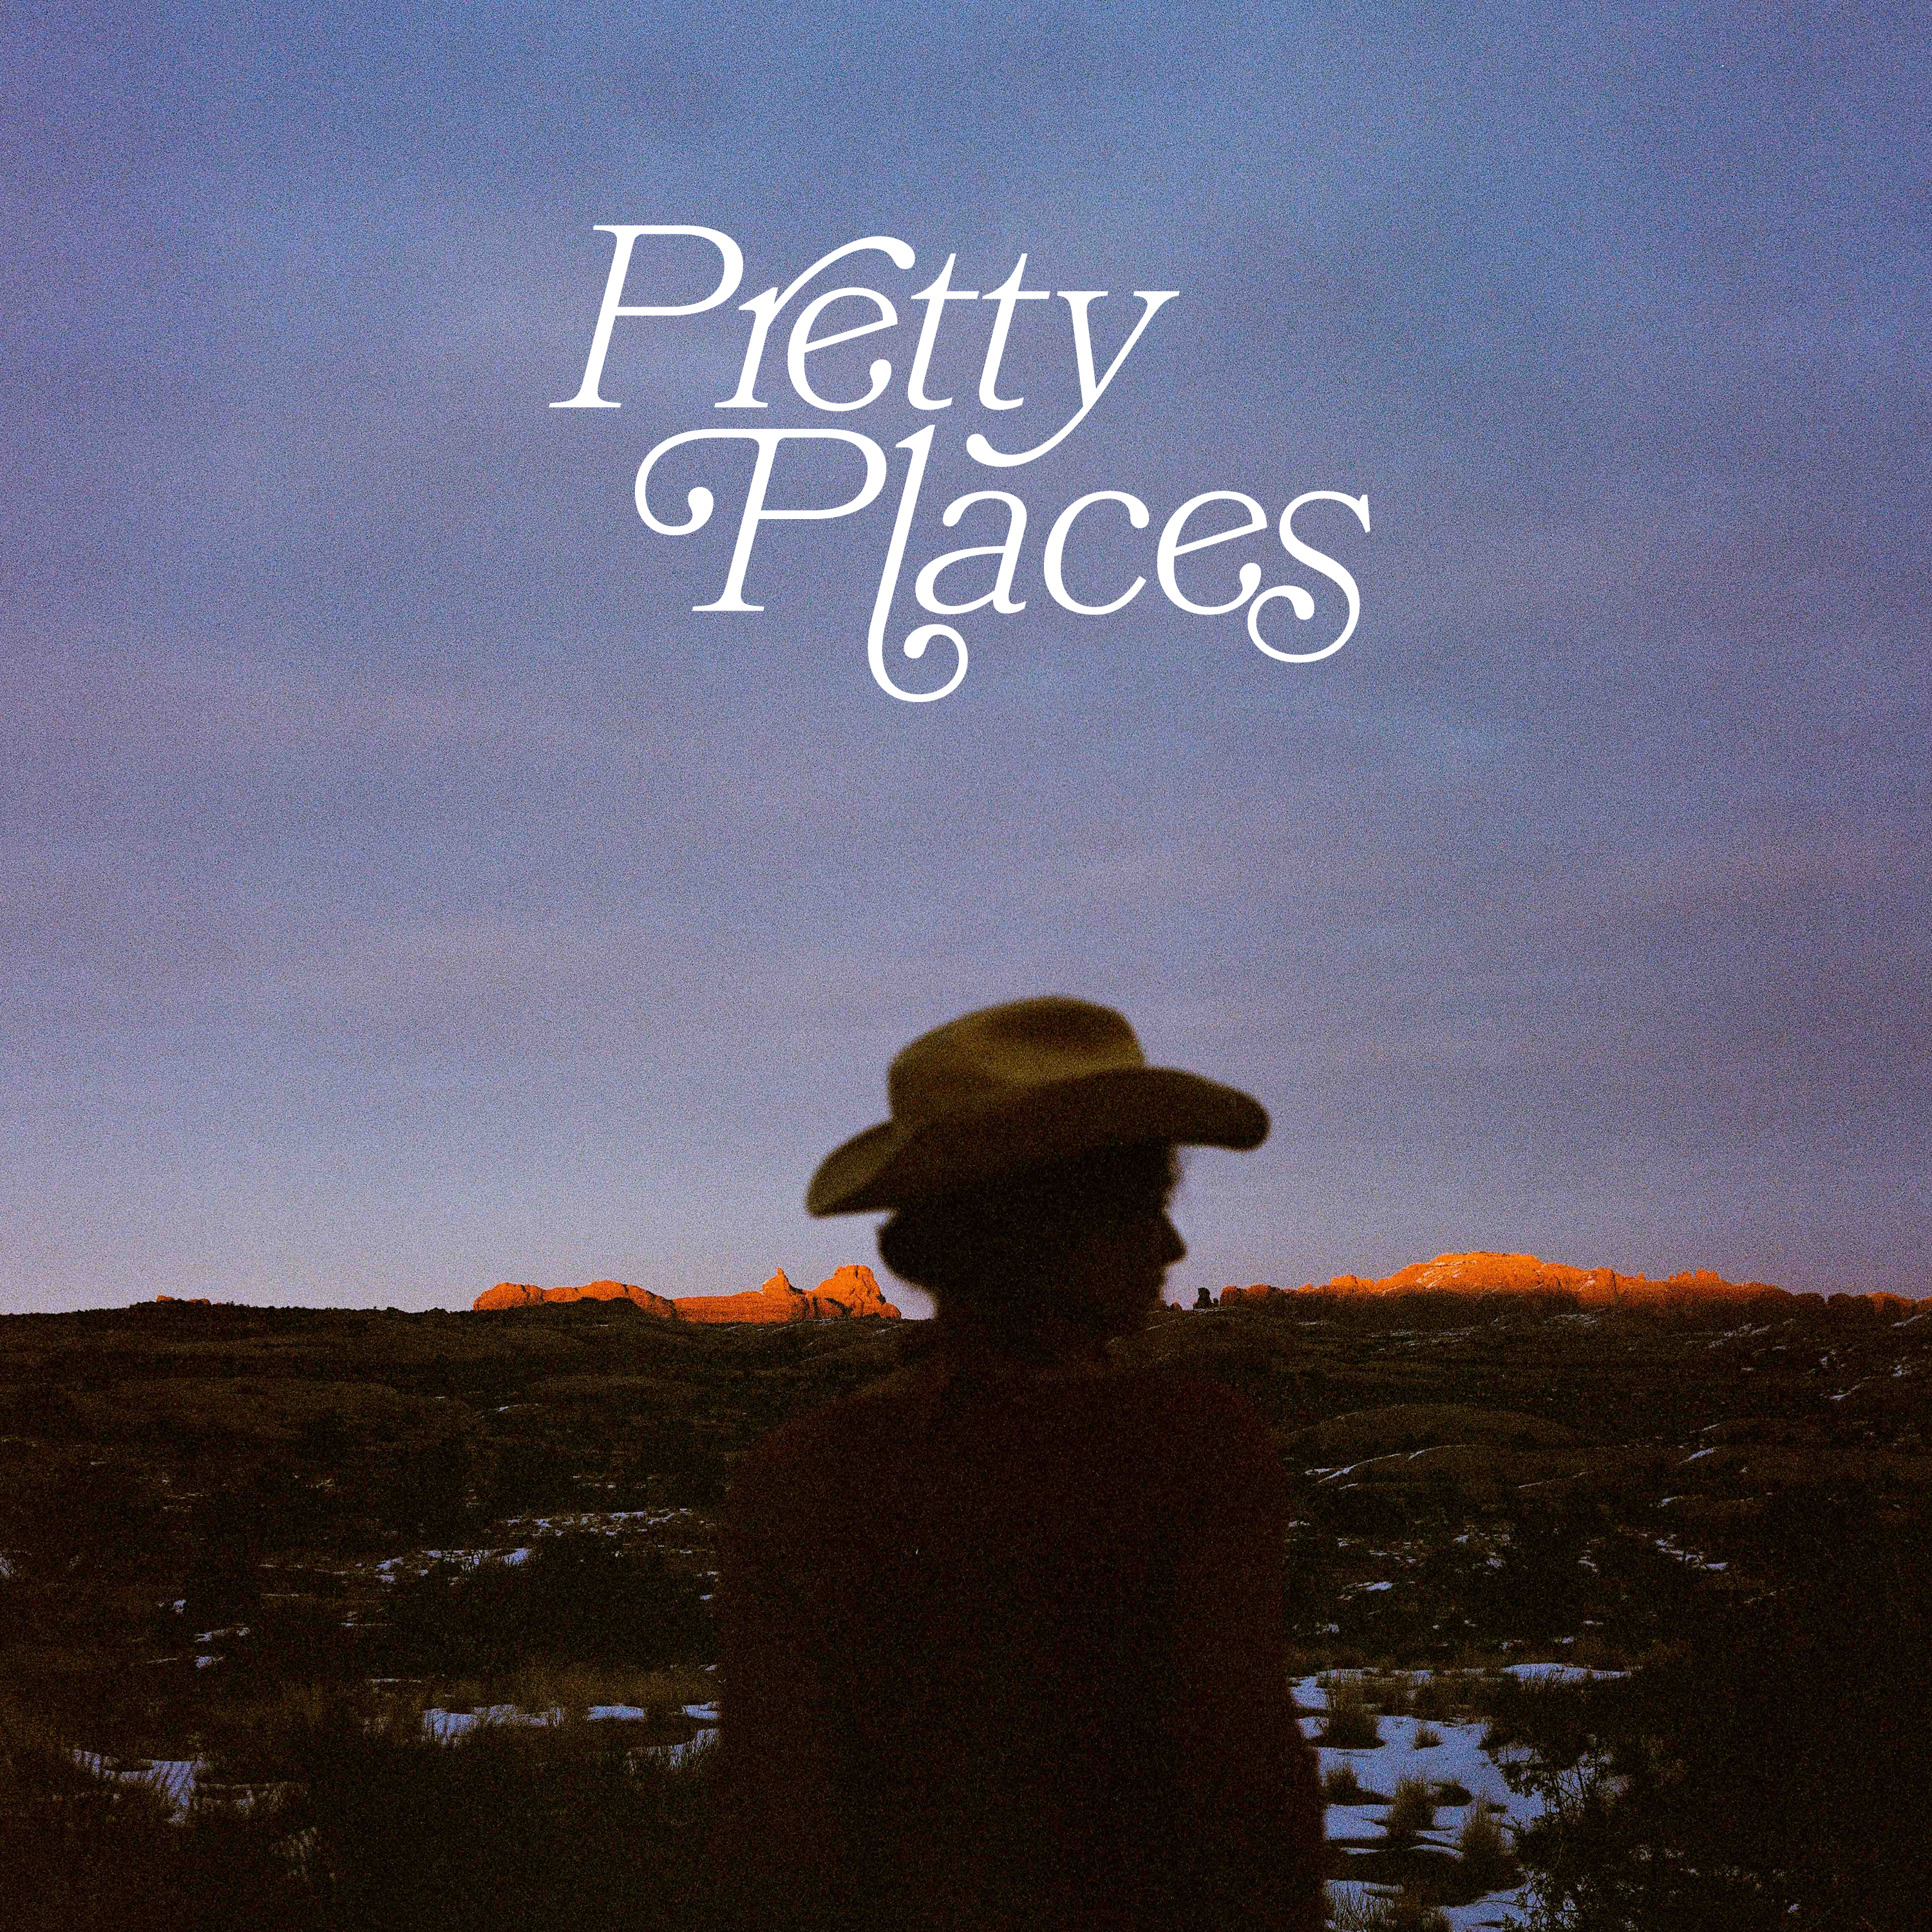 Pretty-Places-Cover-Final.jpg